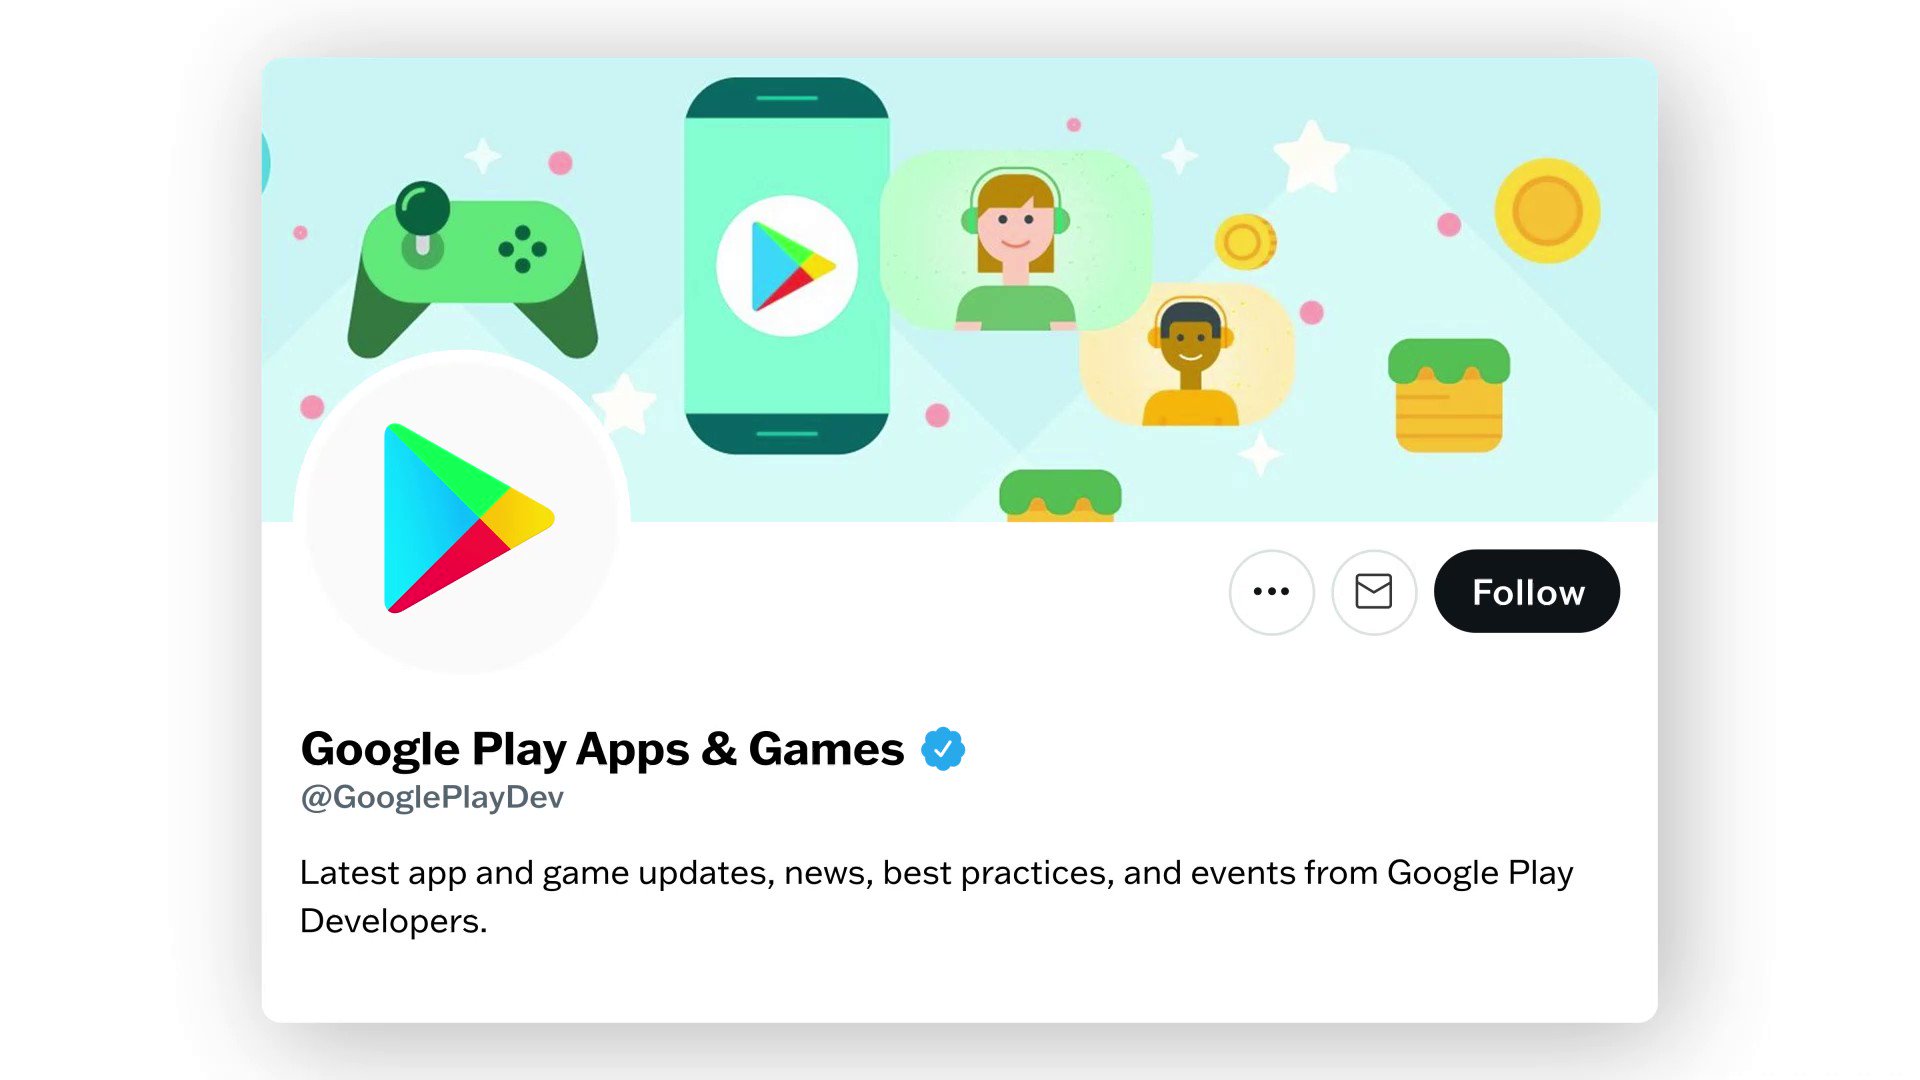 Google Play business community on X: 💡 Channel update coming soon! We're  changing our name to 'Google Play business community' and our handle to  'GooglePlayBiz'! Stay tuned for more insights and news